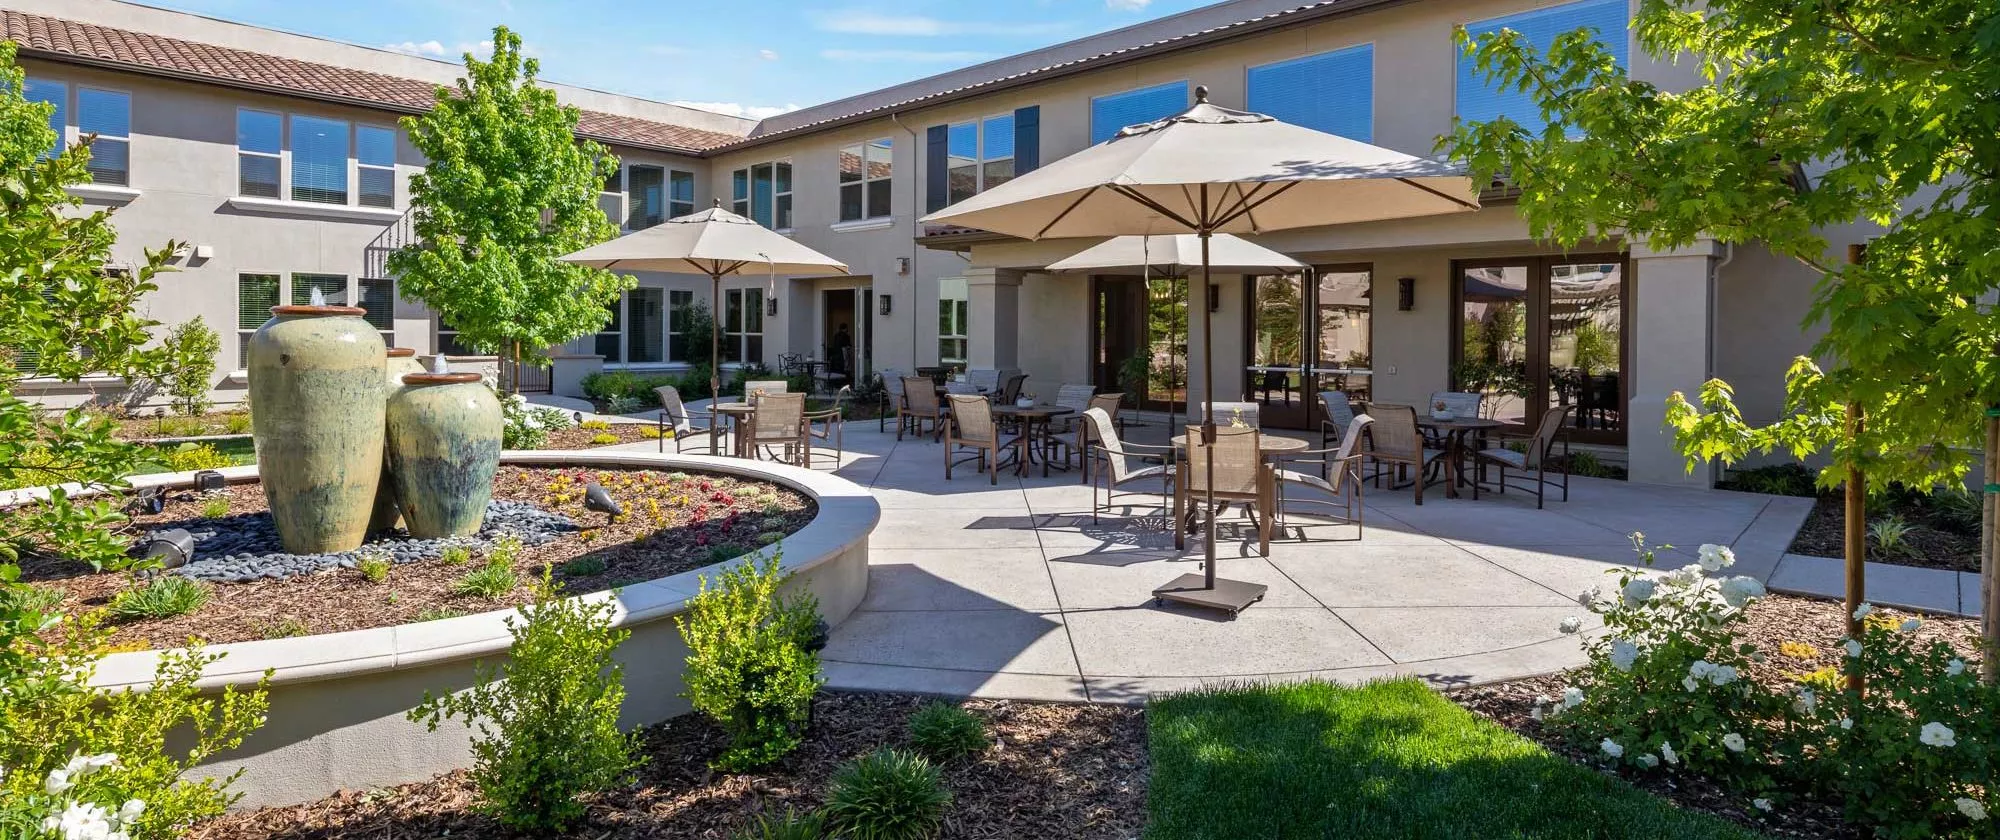 Westpark patio with fountains, dining tables, chairs and umbrellas